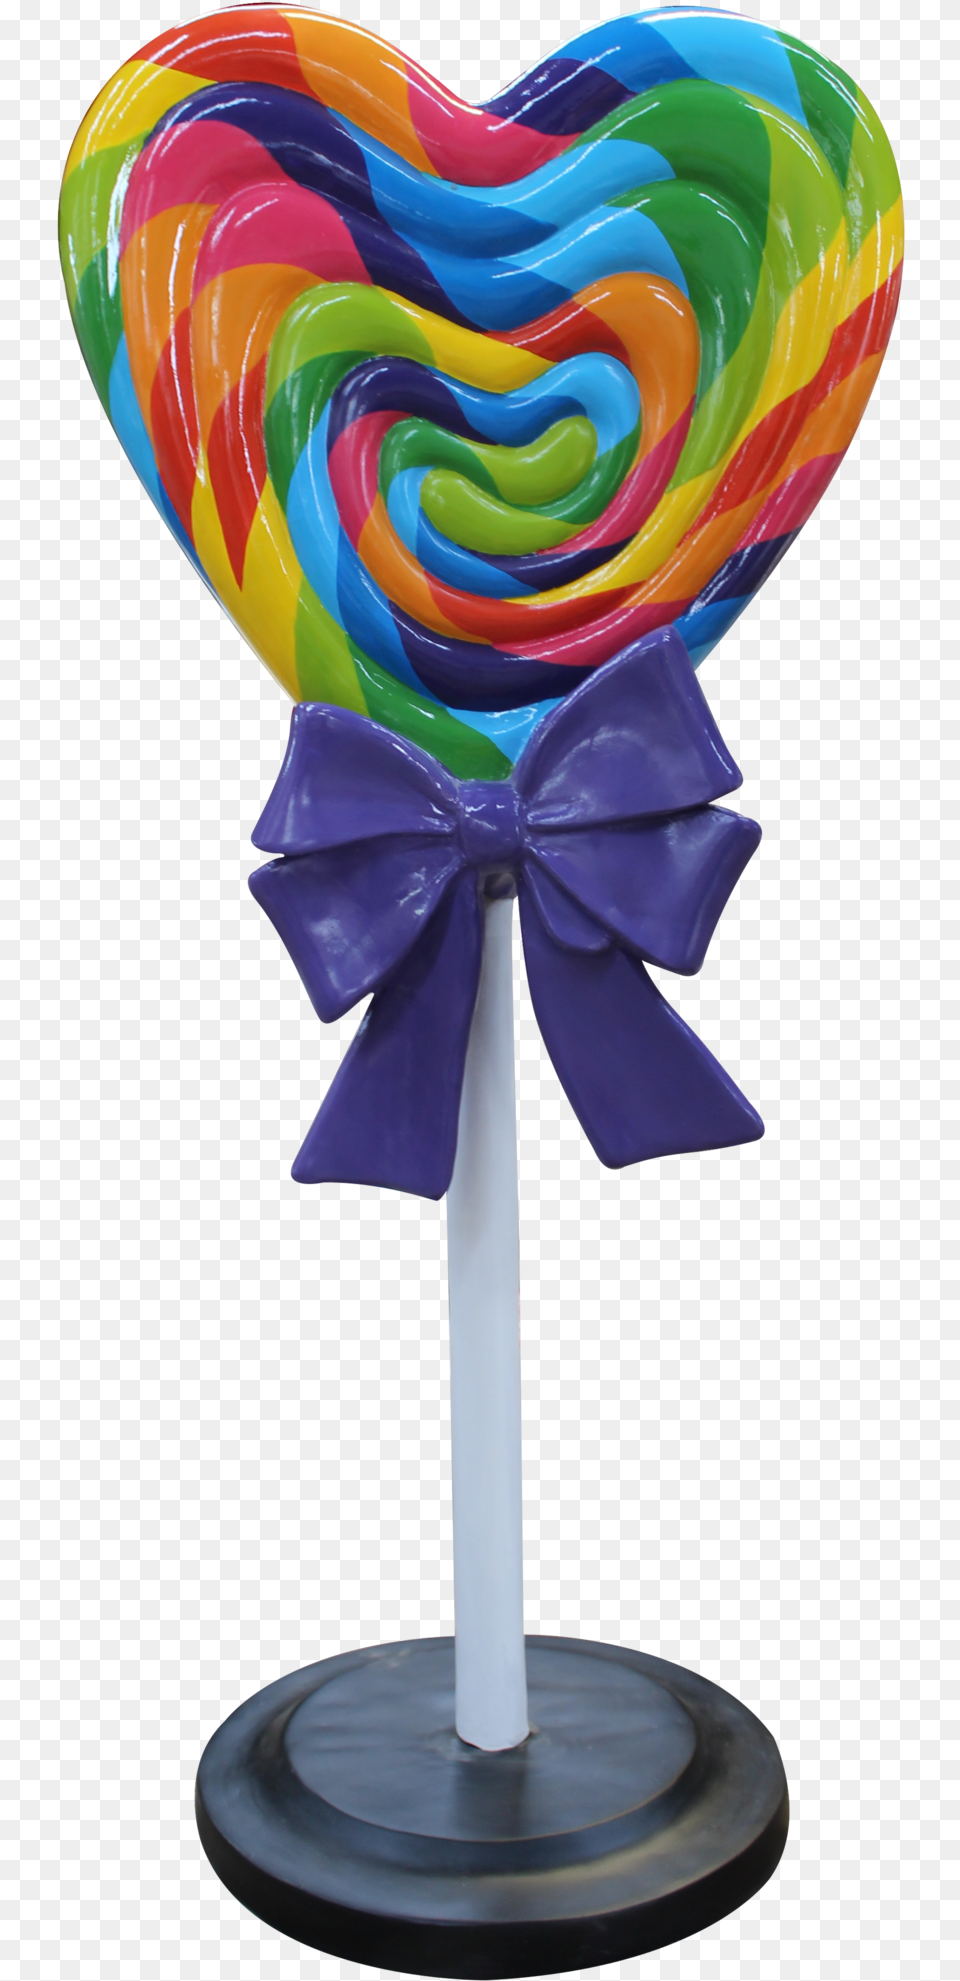 Rainbow Heart Lollipop Over Sized Statue Lm Treasures Statue, Candy, Food, Sweets Png Image